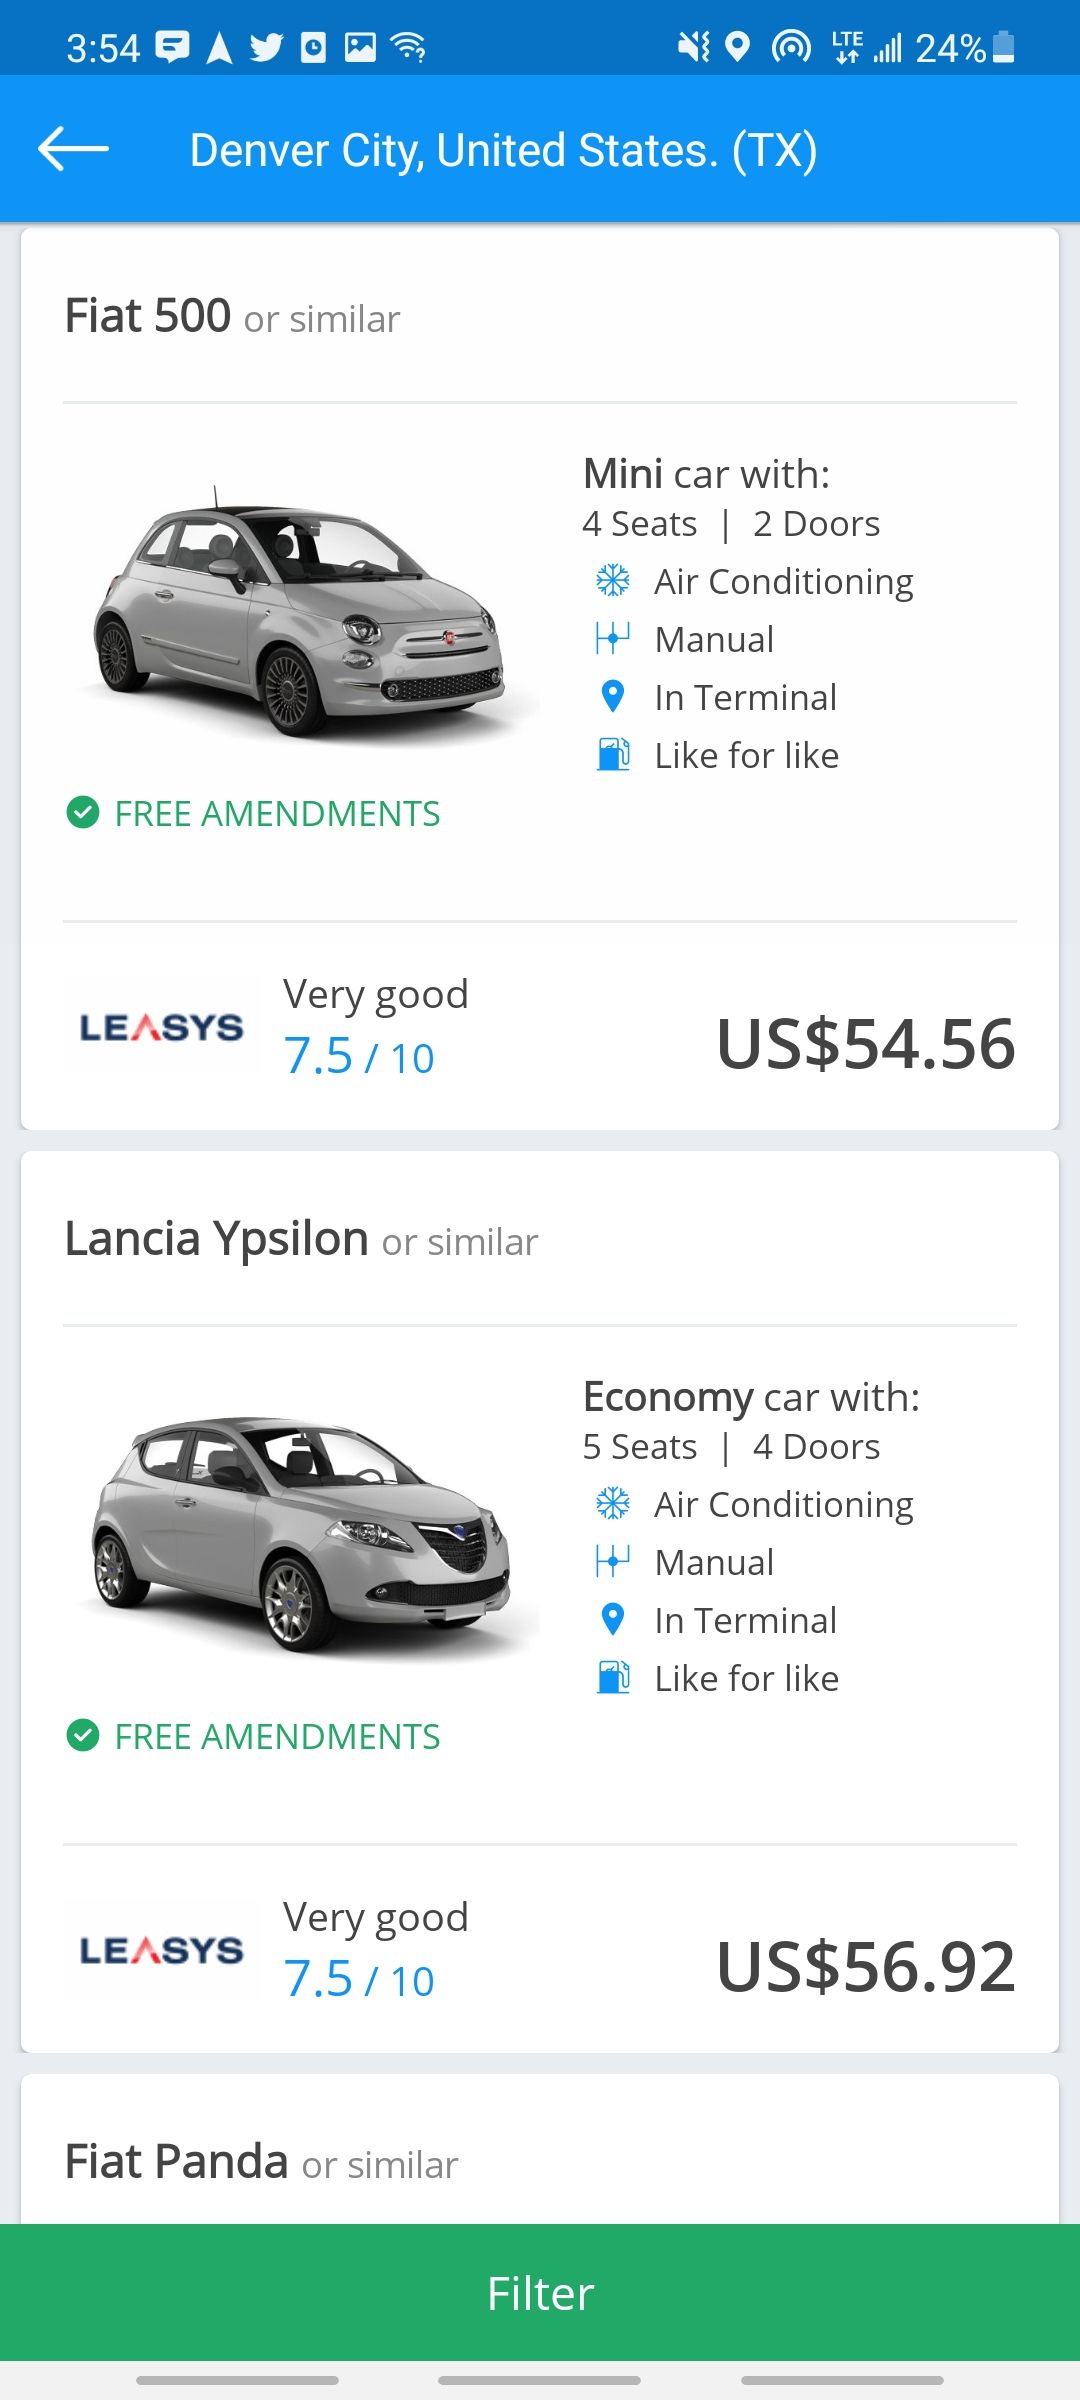 rentalcars.com app choosing a car from their selections